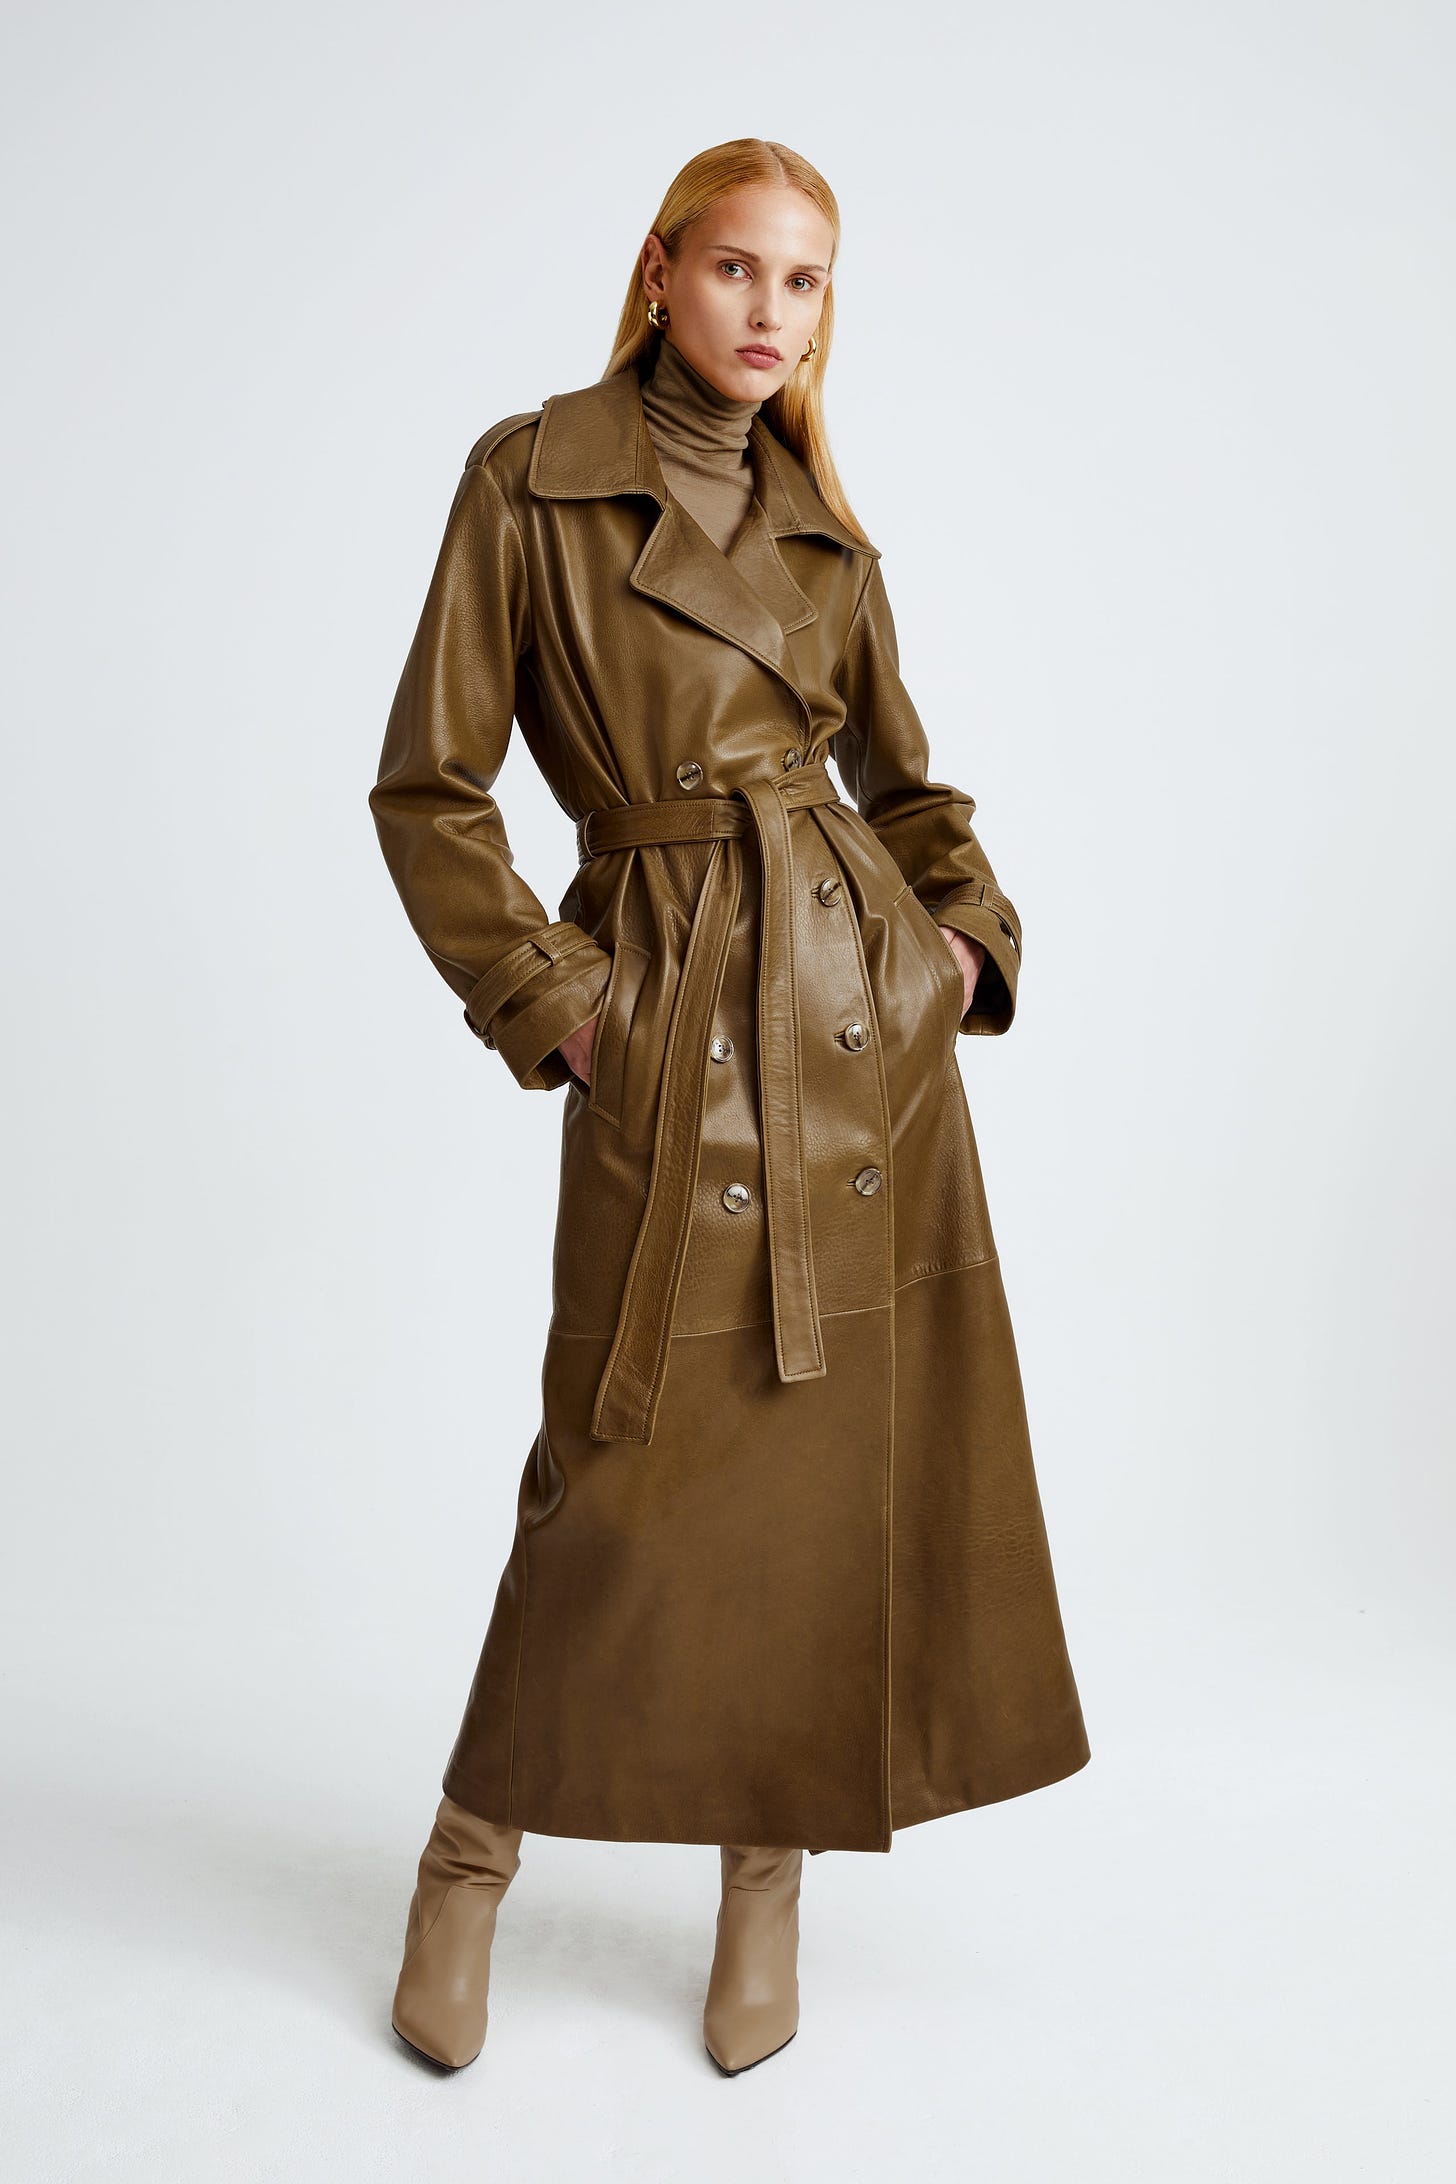 The Haya zeytoun double-breasted long leather trench front